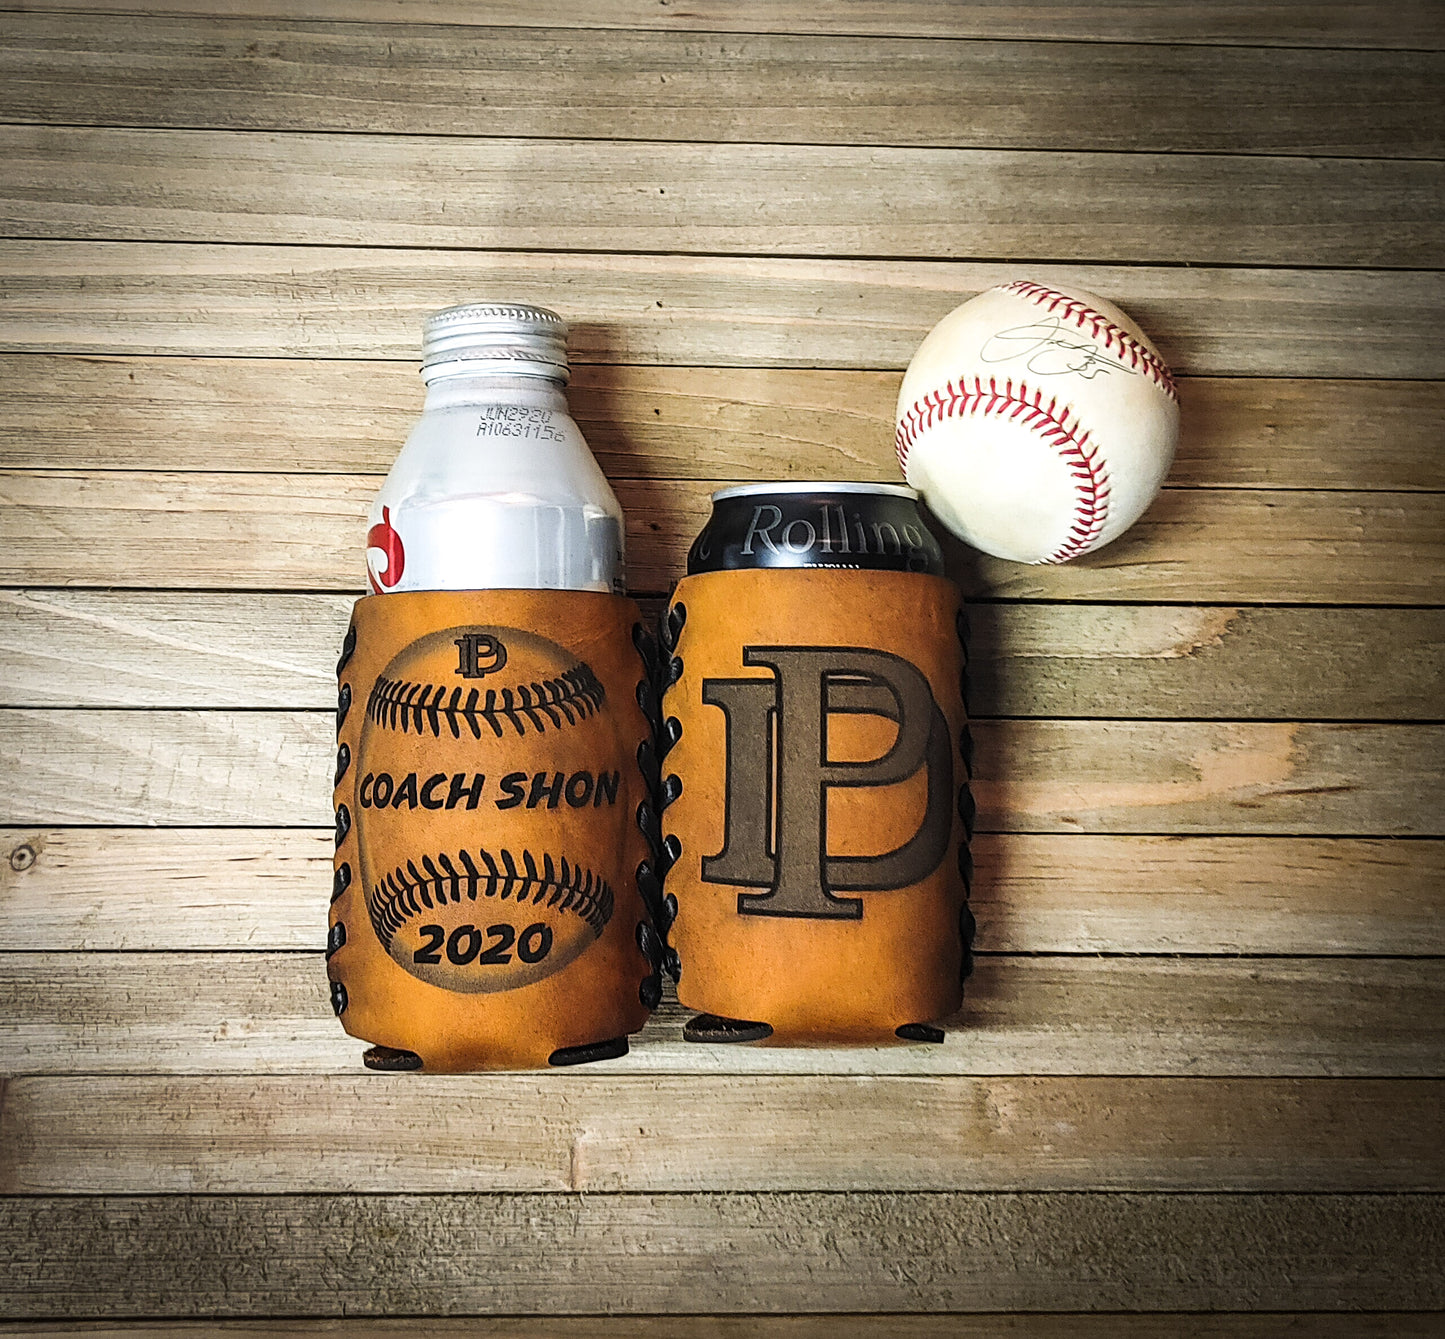 210 custom koozies engraved with baseball logo and personalized to coach show with the year 2020 coach's gift ideas